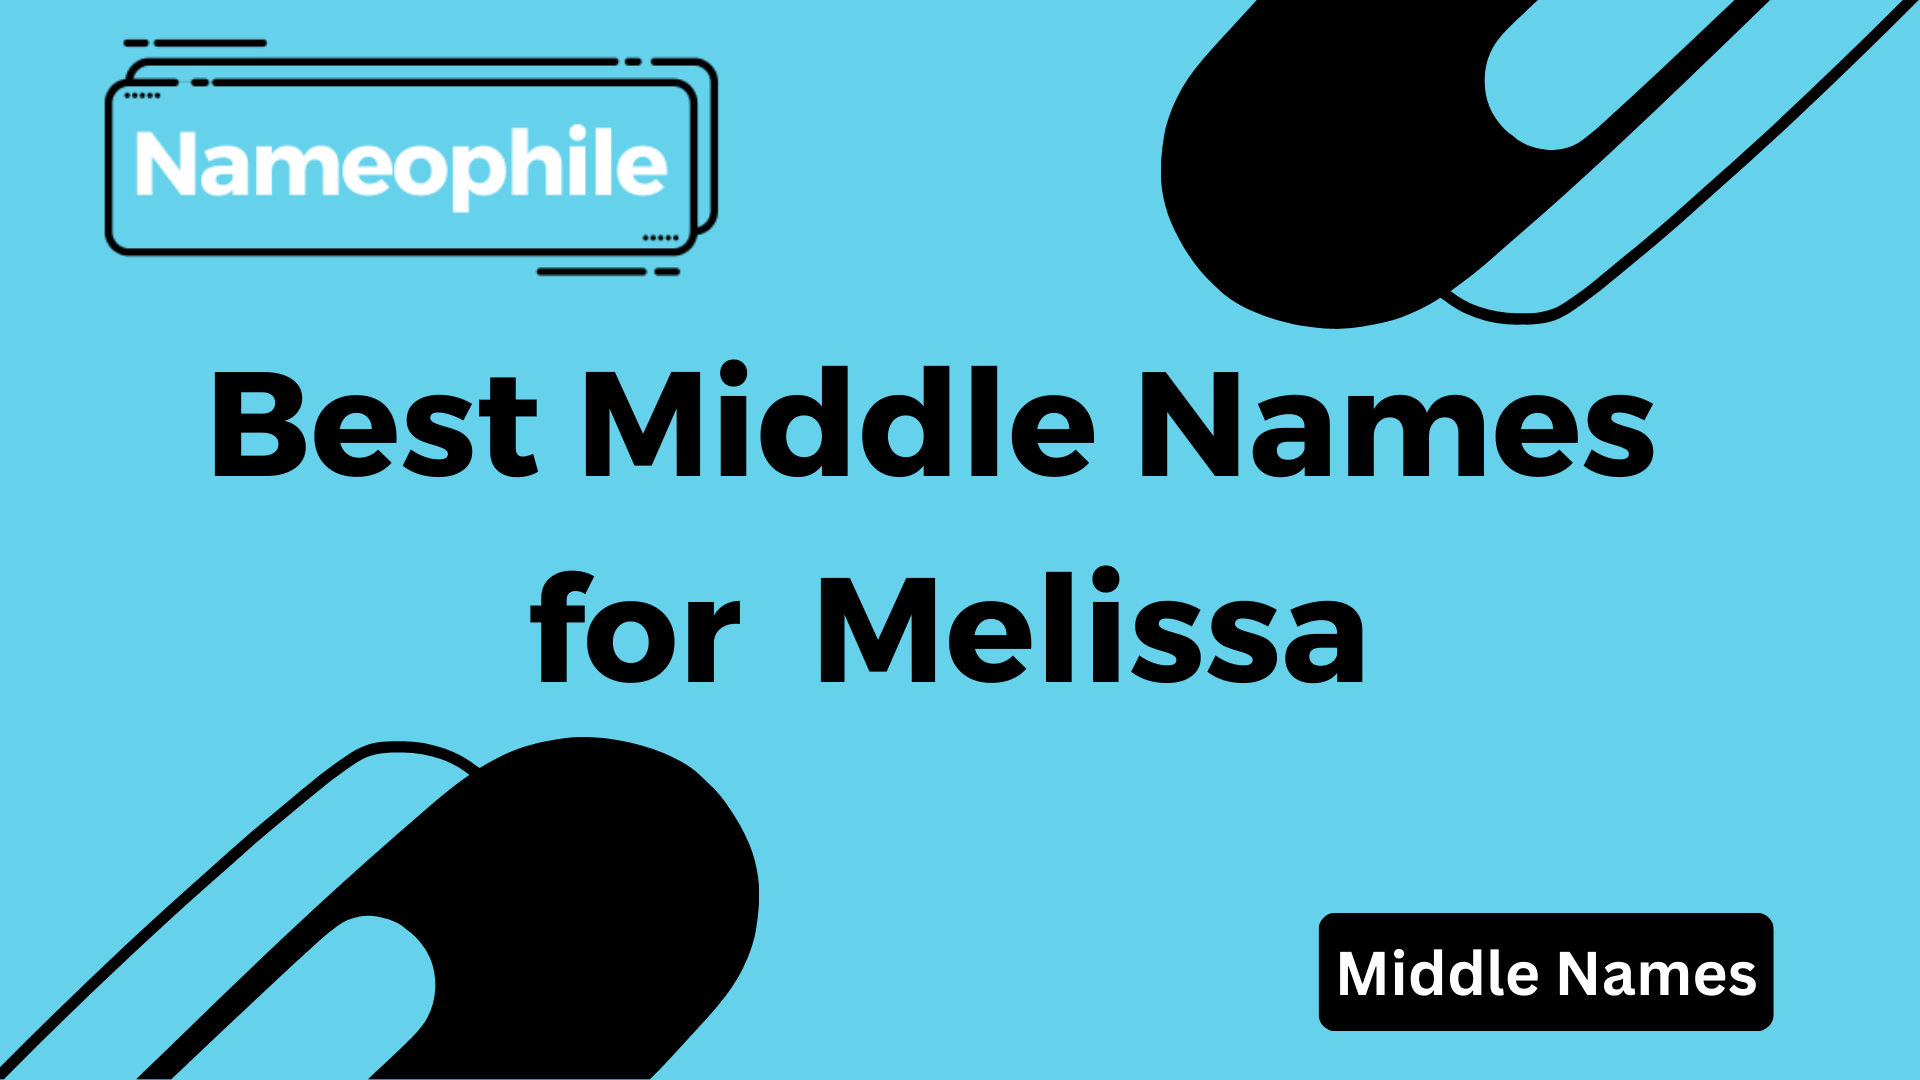 Best Middle Names for Melissa